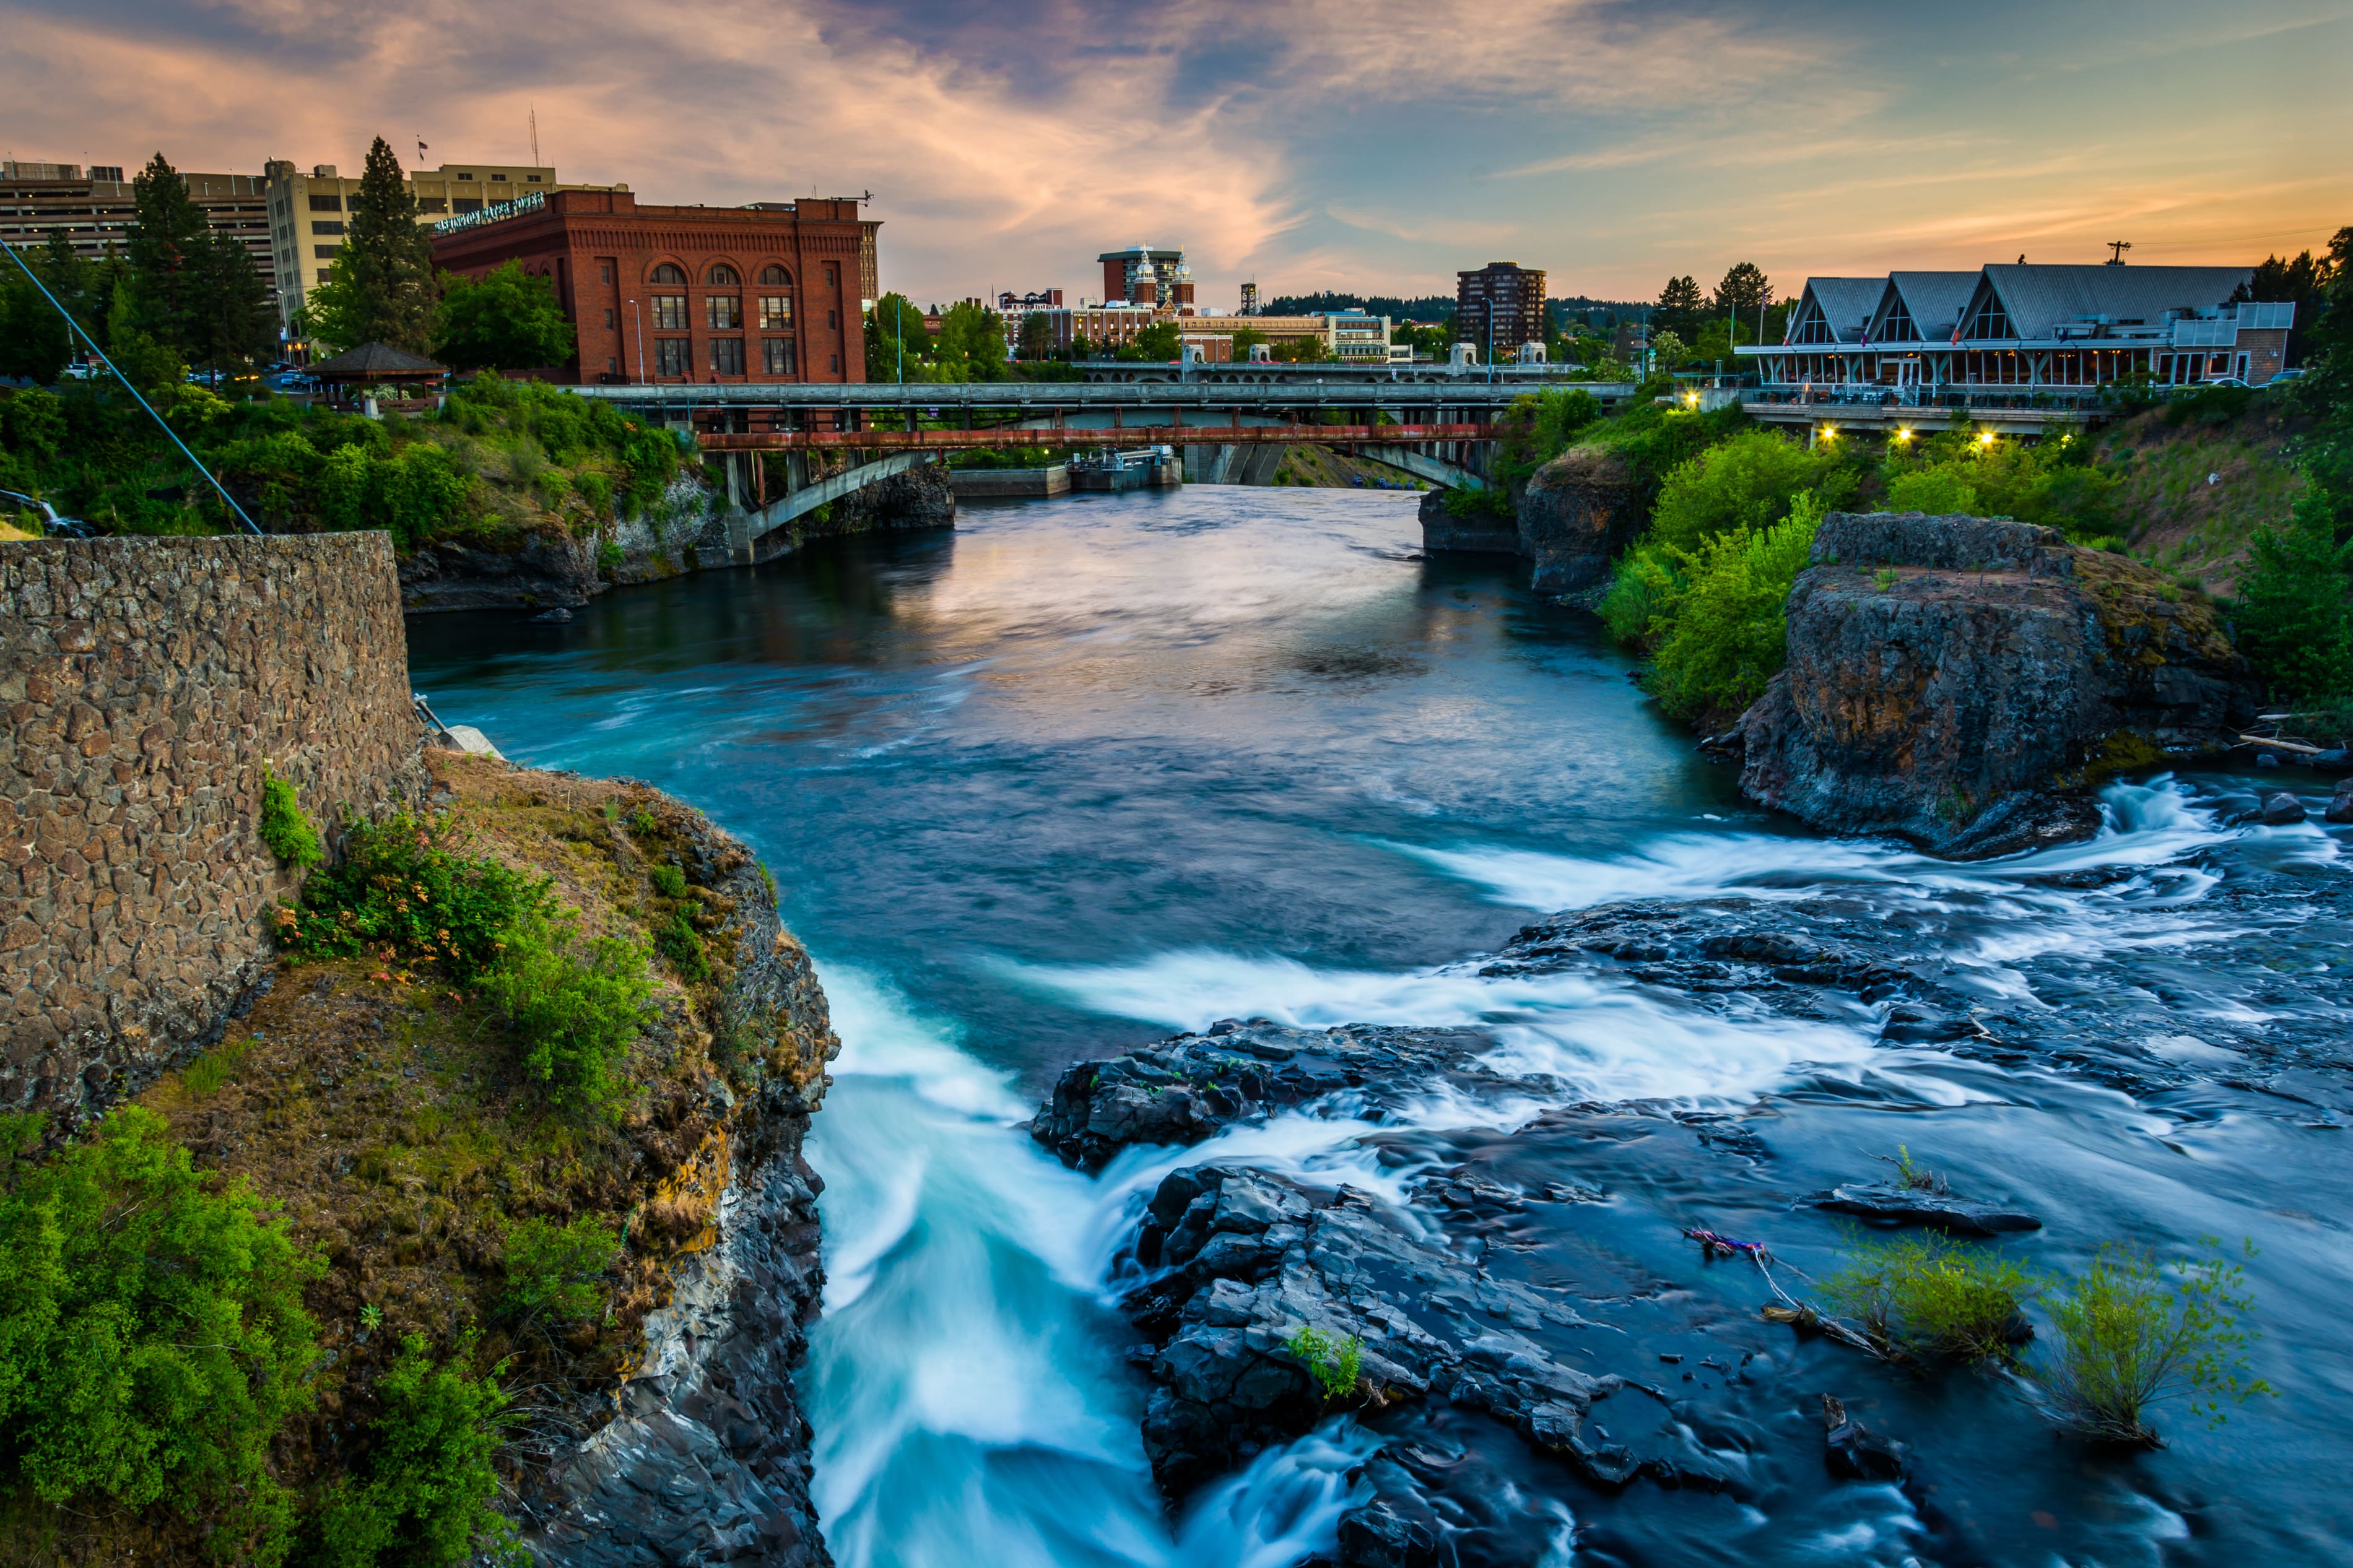 Spokane river and falls with bridge and buildings in background